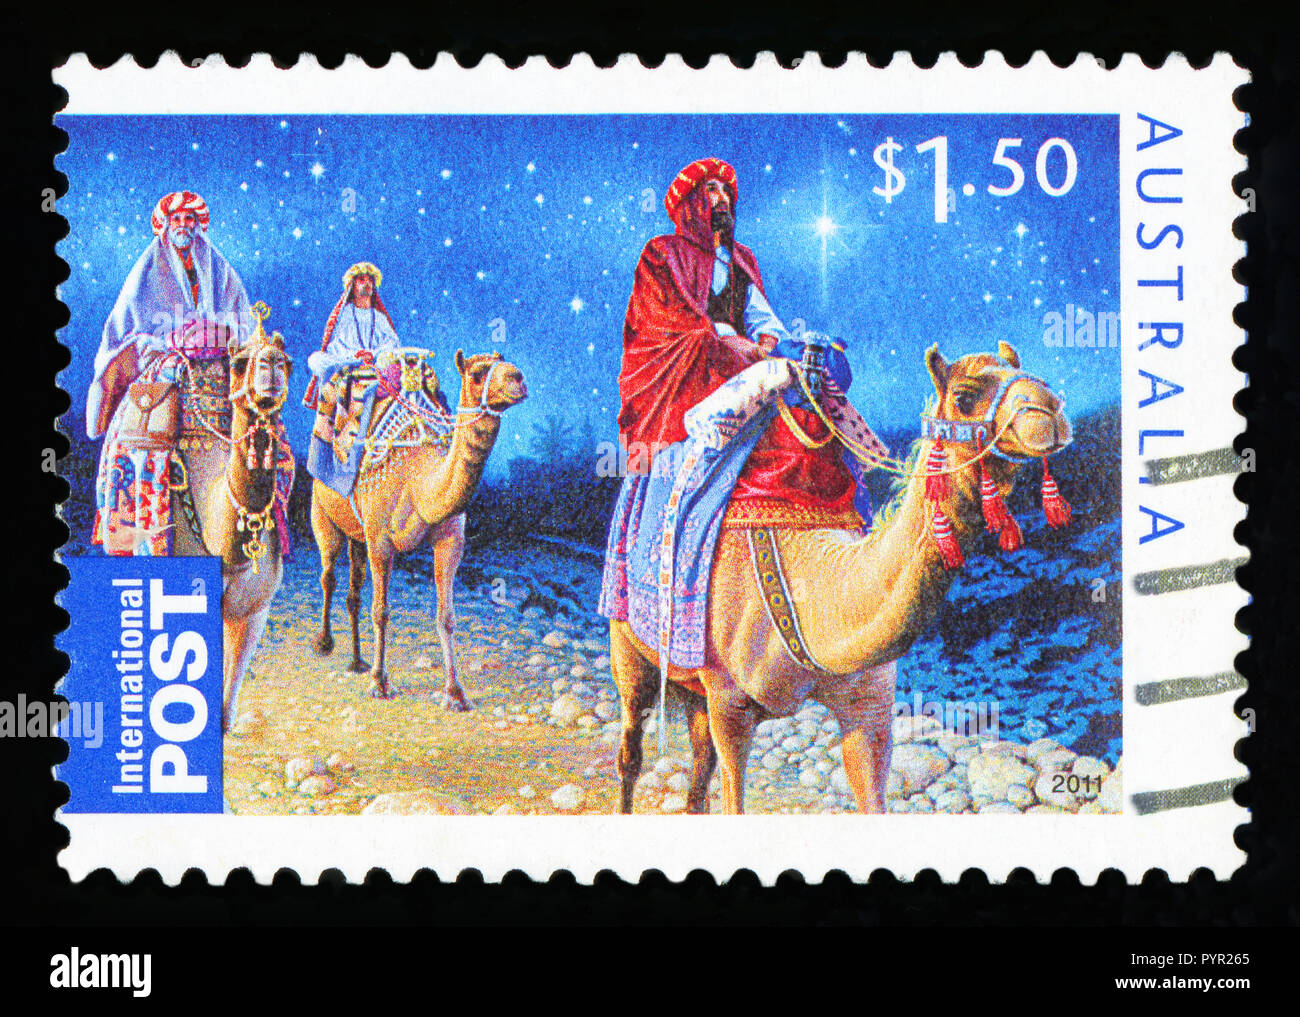 AUSTRALIA - CIRCA 2011: An Australian Used Christmas Postage Stamp showing the Three Kings riding on Camels, circa 2011 Stock Photo